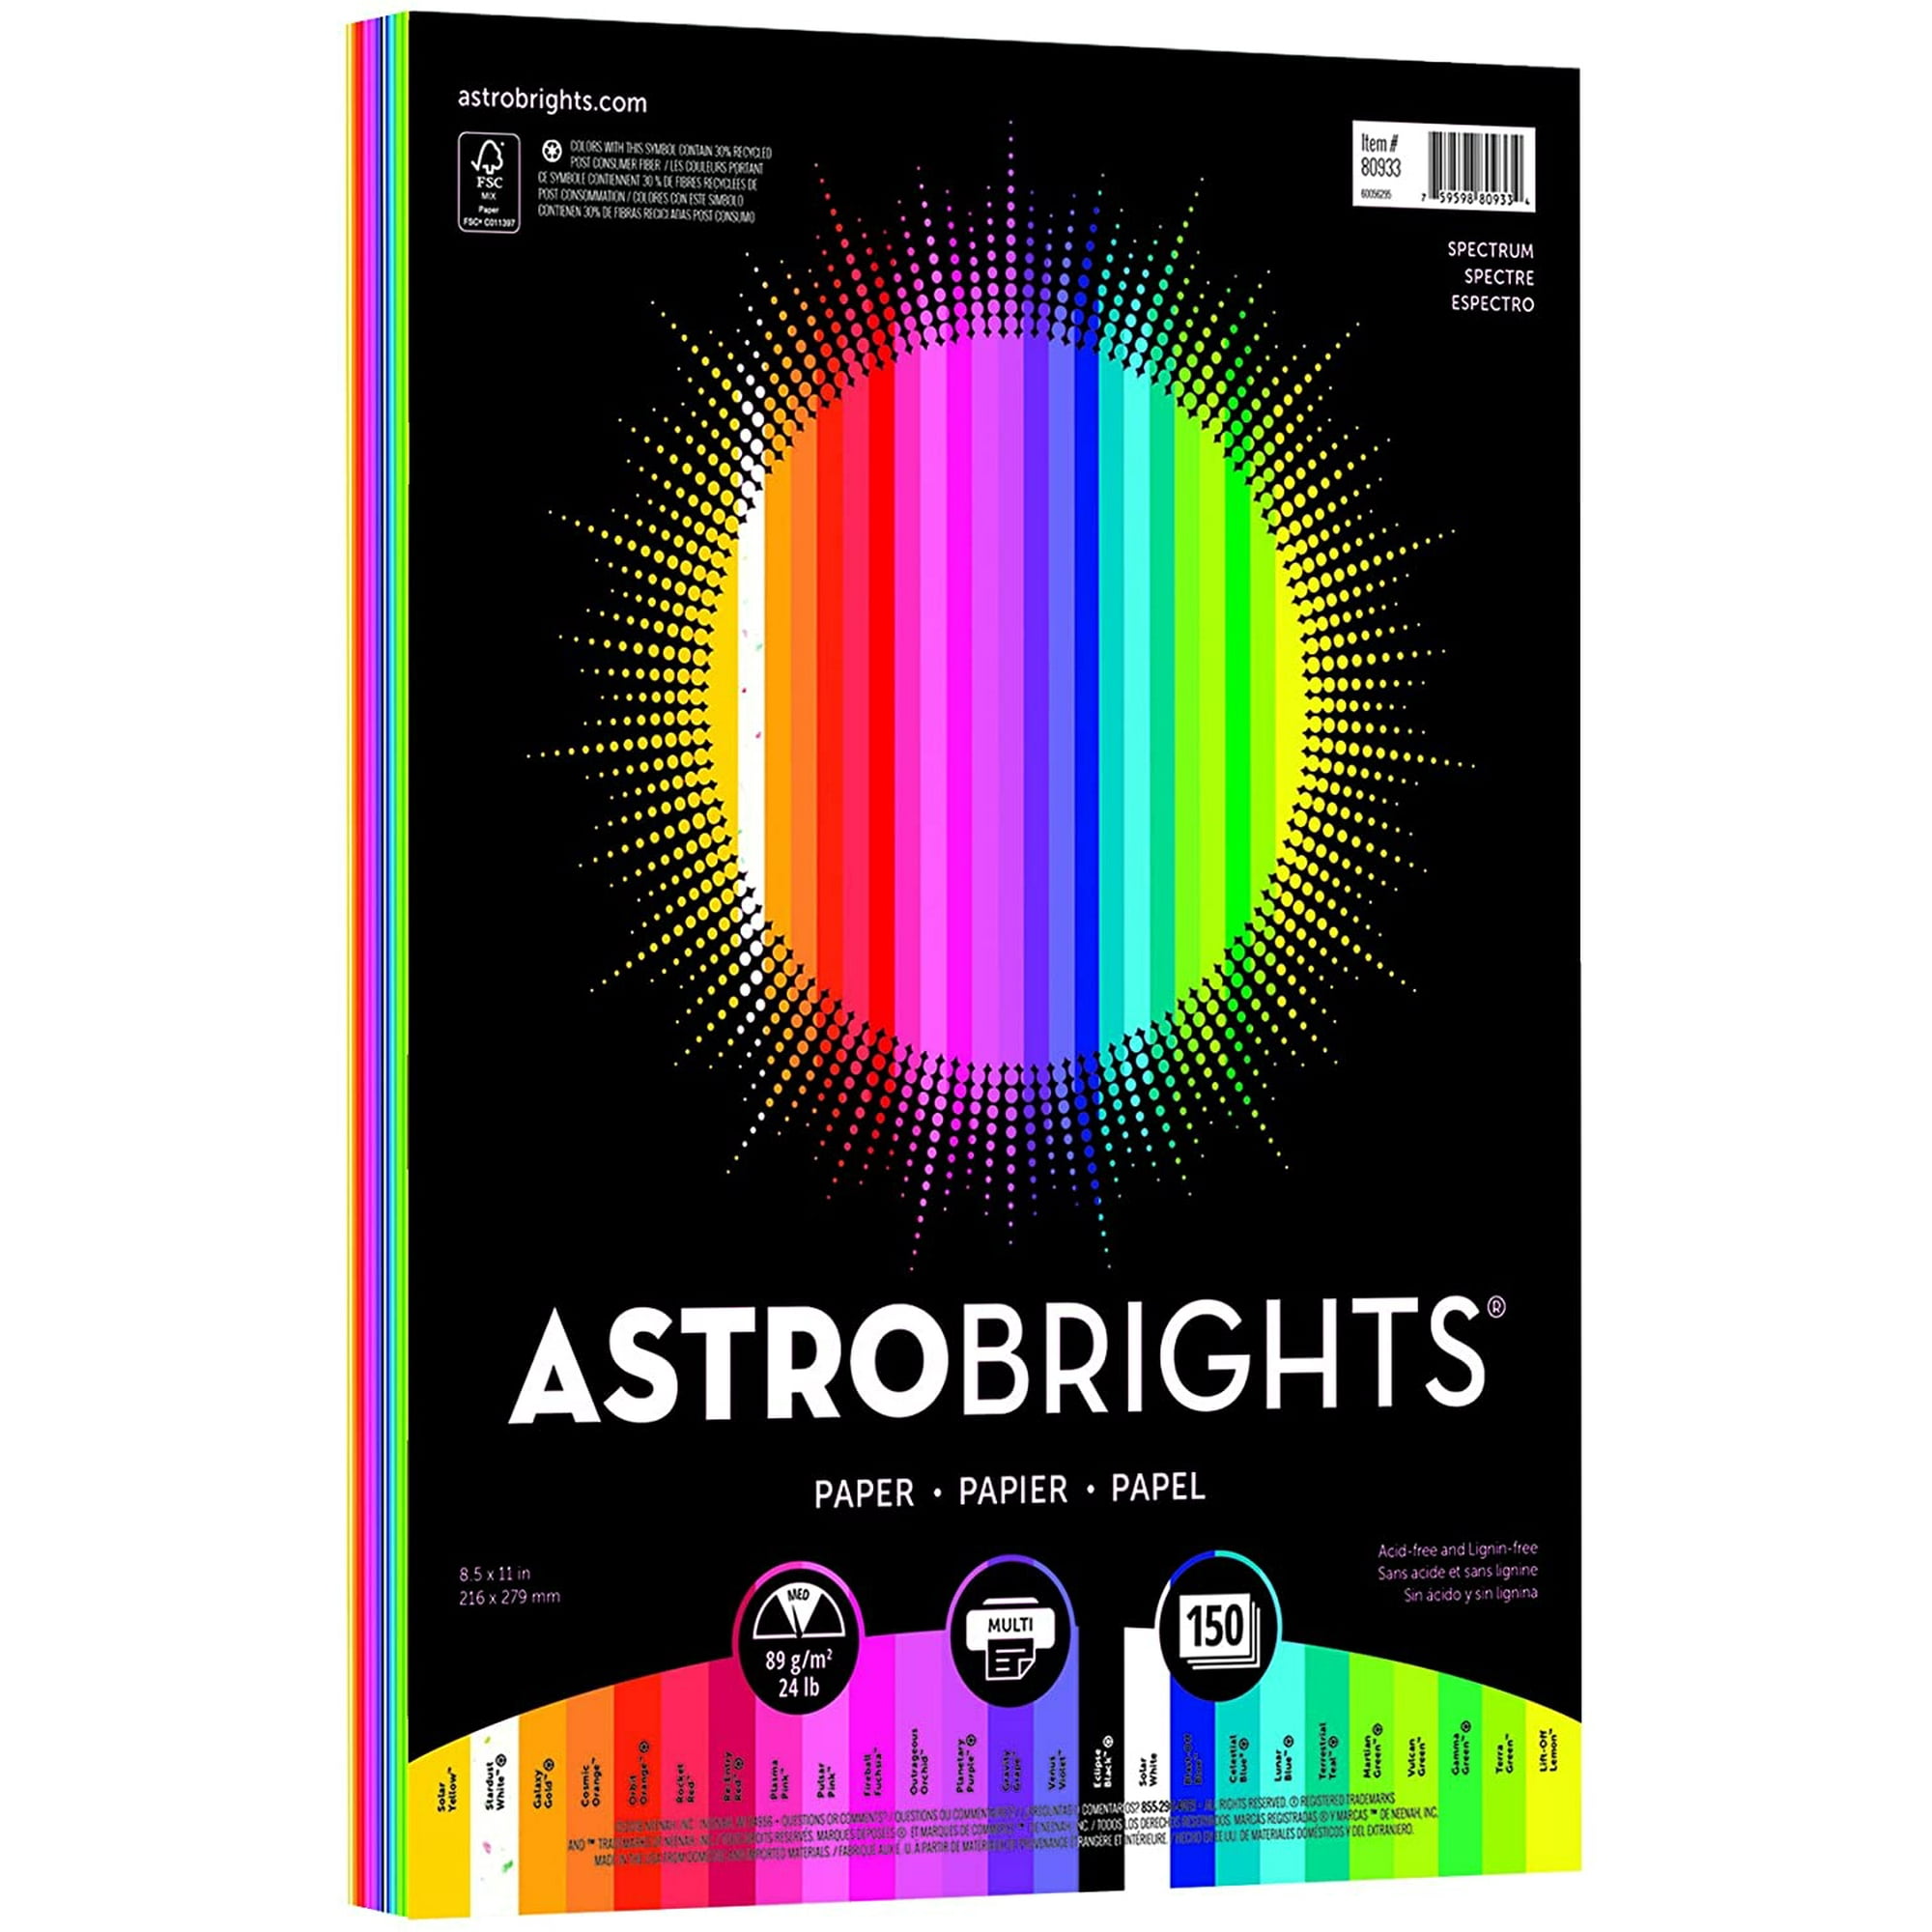 Astrobrights Mega Collection 91623 Colored Paper,Classic 5-Color Assortment 24 lb/89 gsm 625 Sheets 8.5 x 11 MORE SHEETS! 